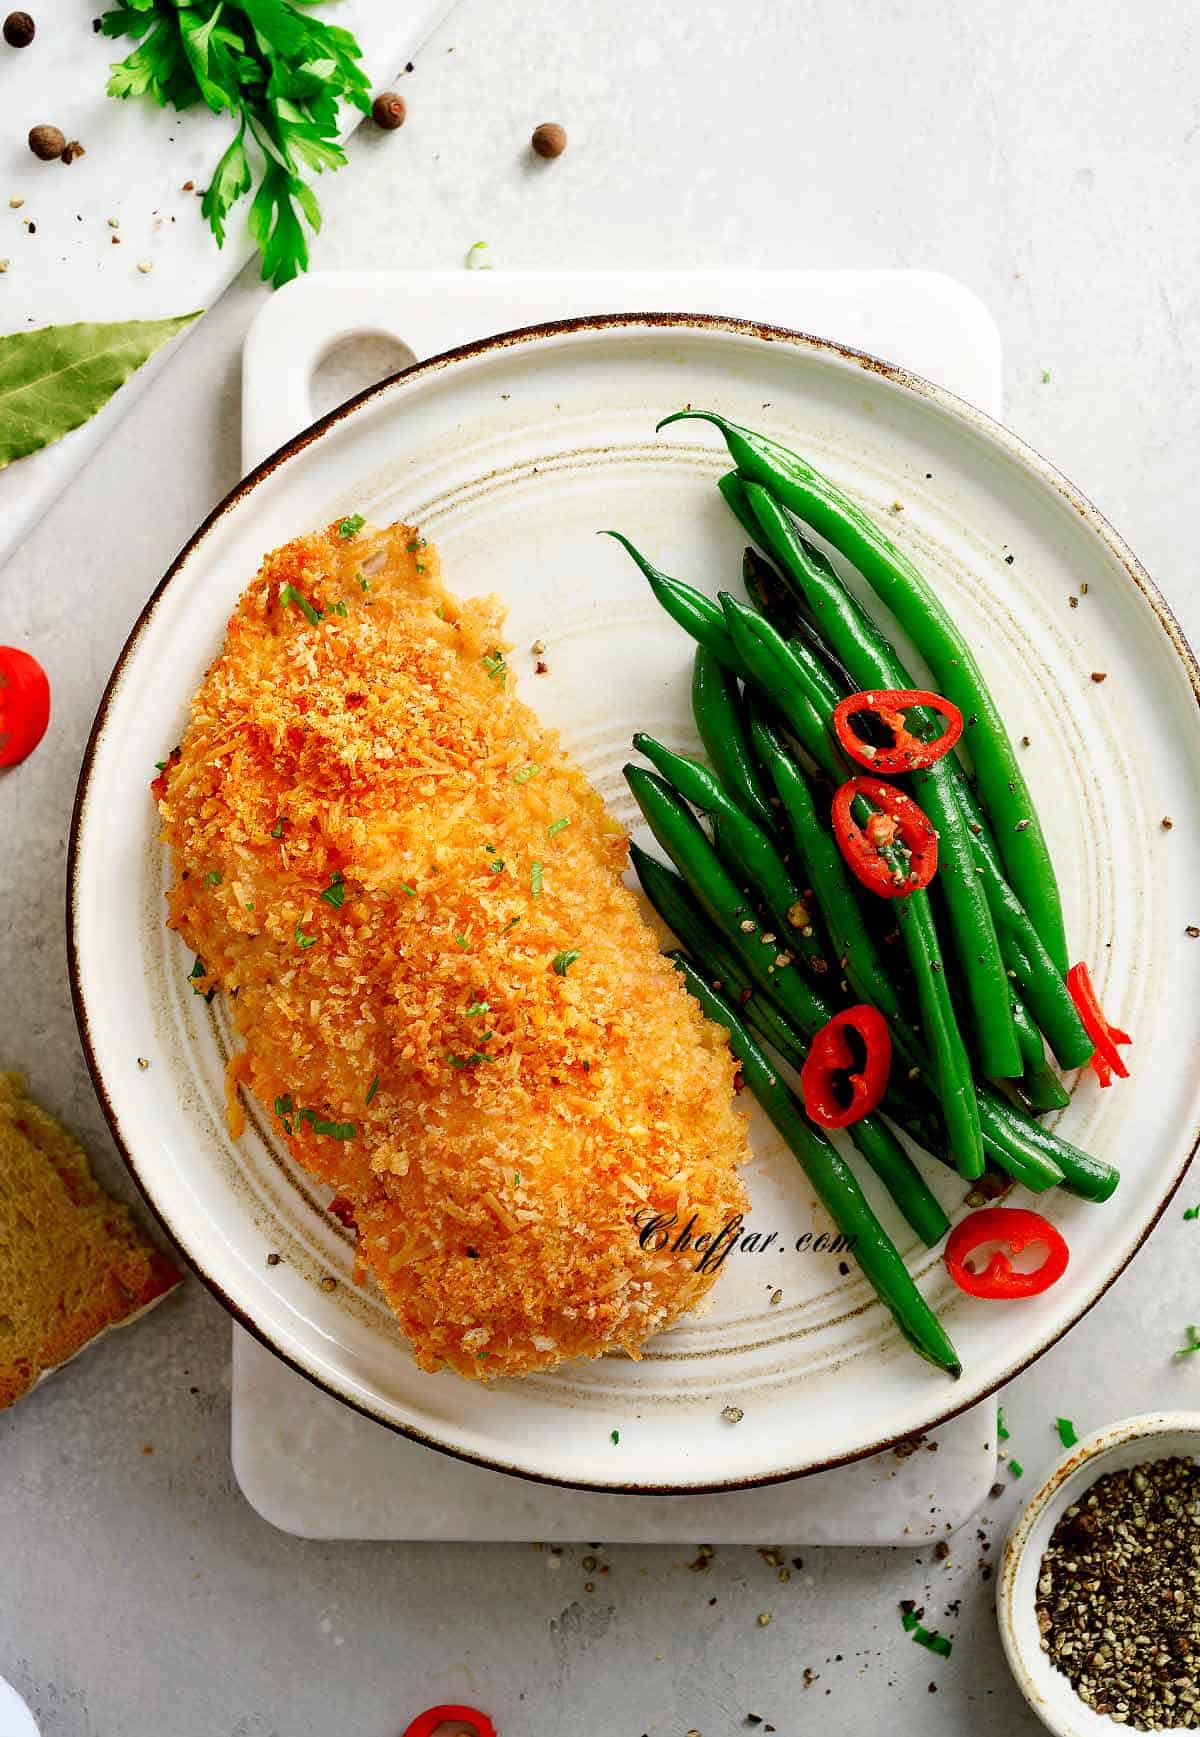 How To Make Skinless Chicken Breast Crispy?